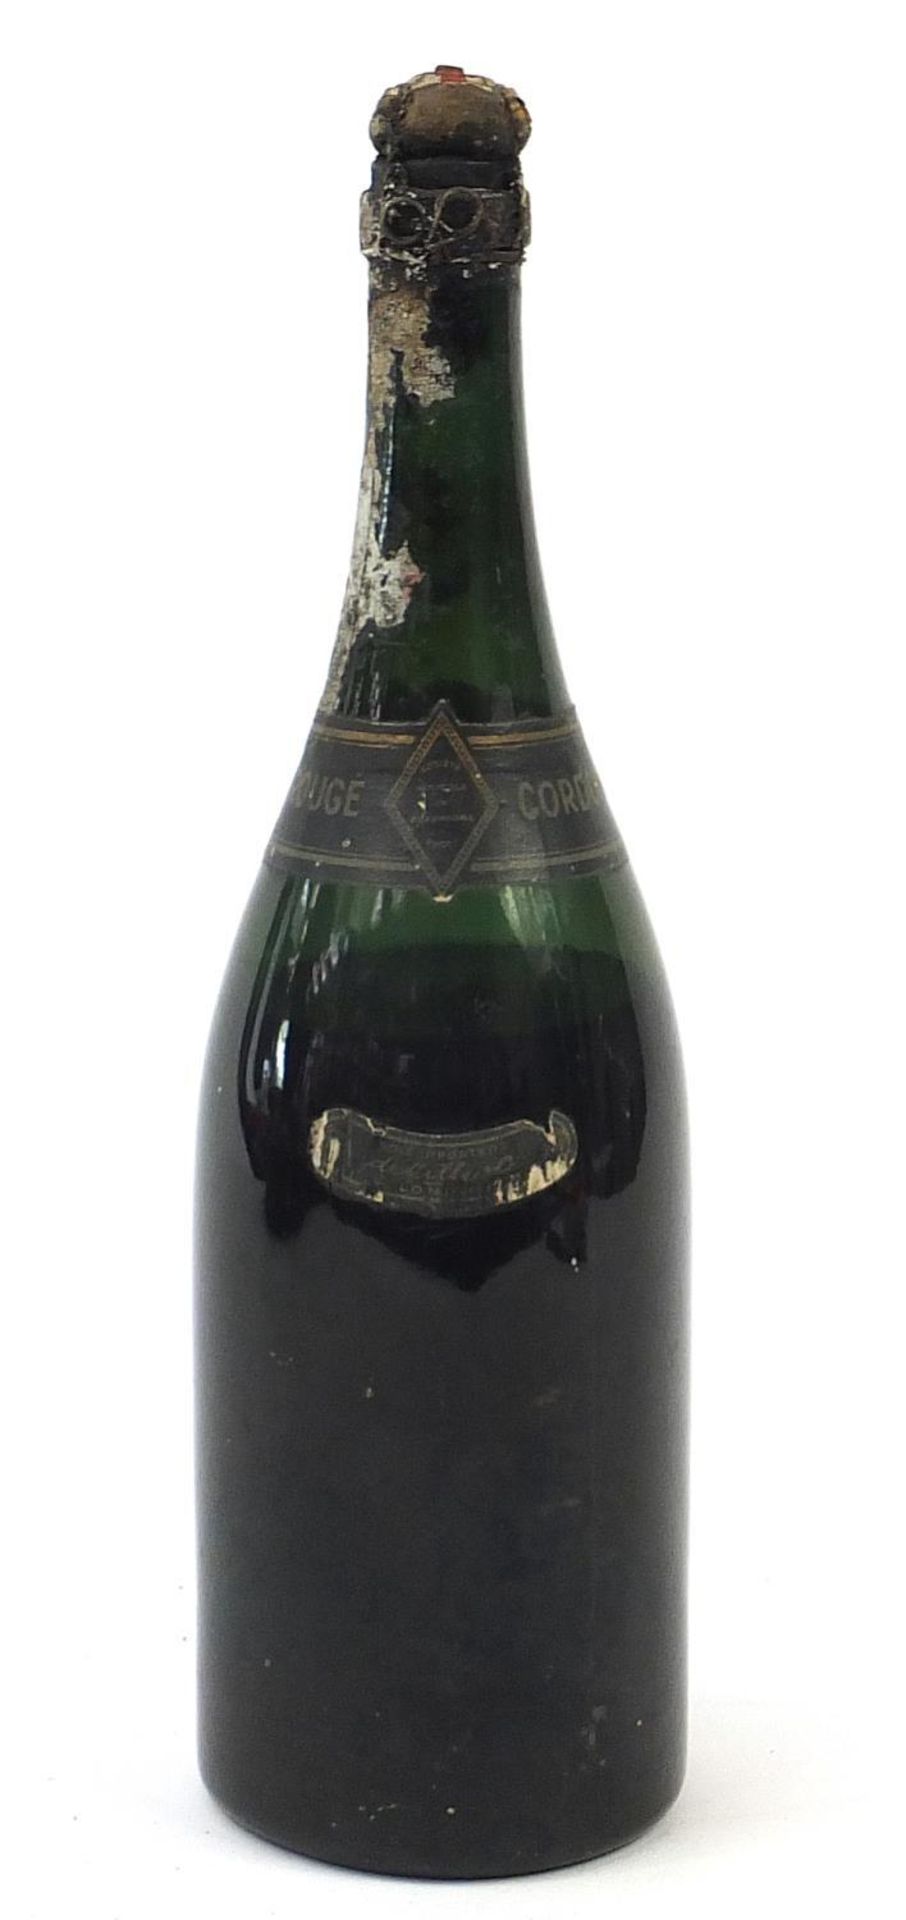 Magnum bottle of 1937 Cordon Rouge Champagne - Image 3 of 4